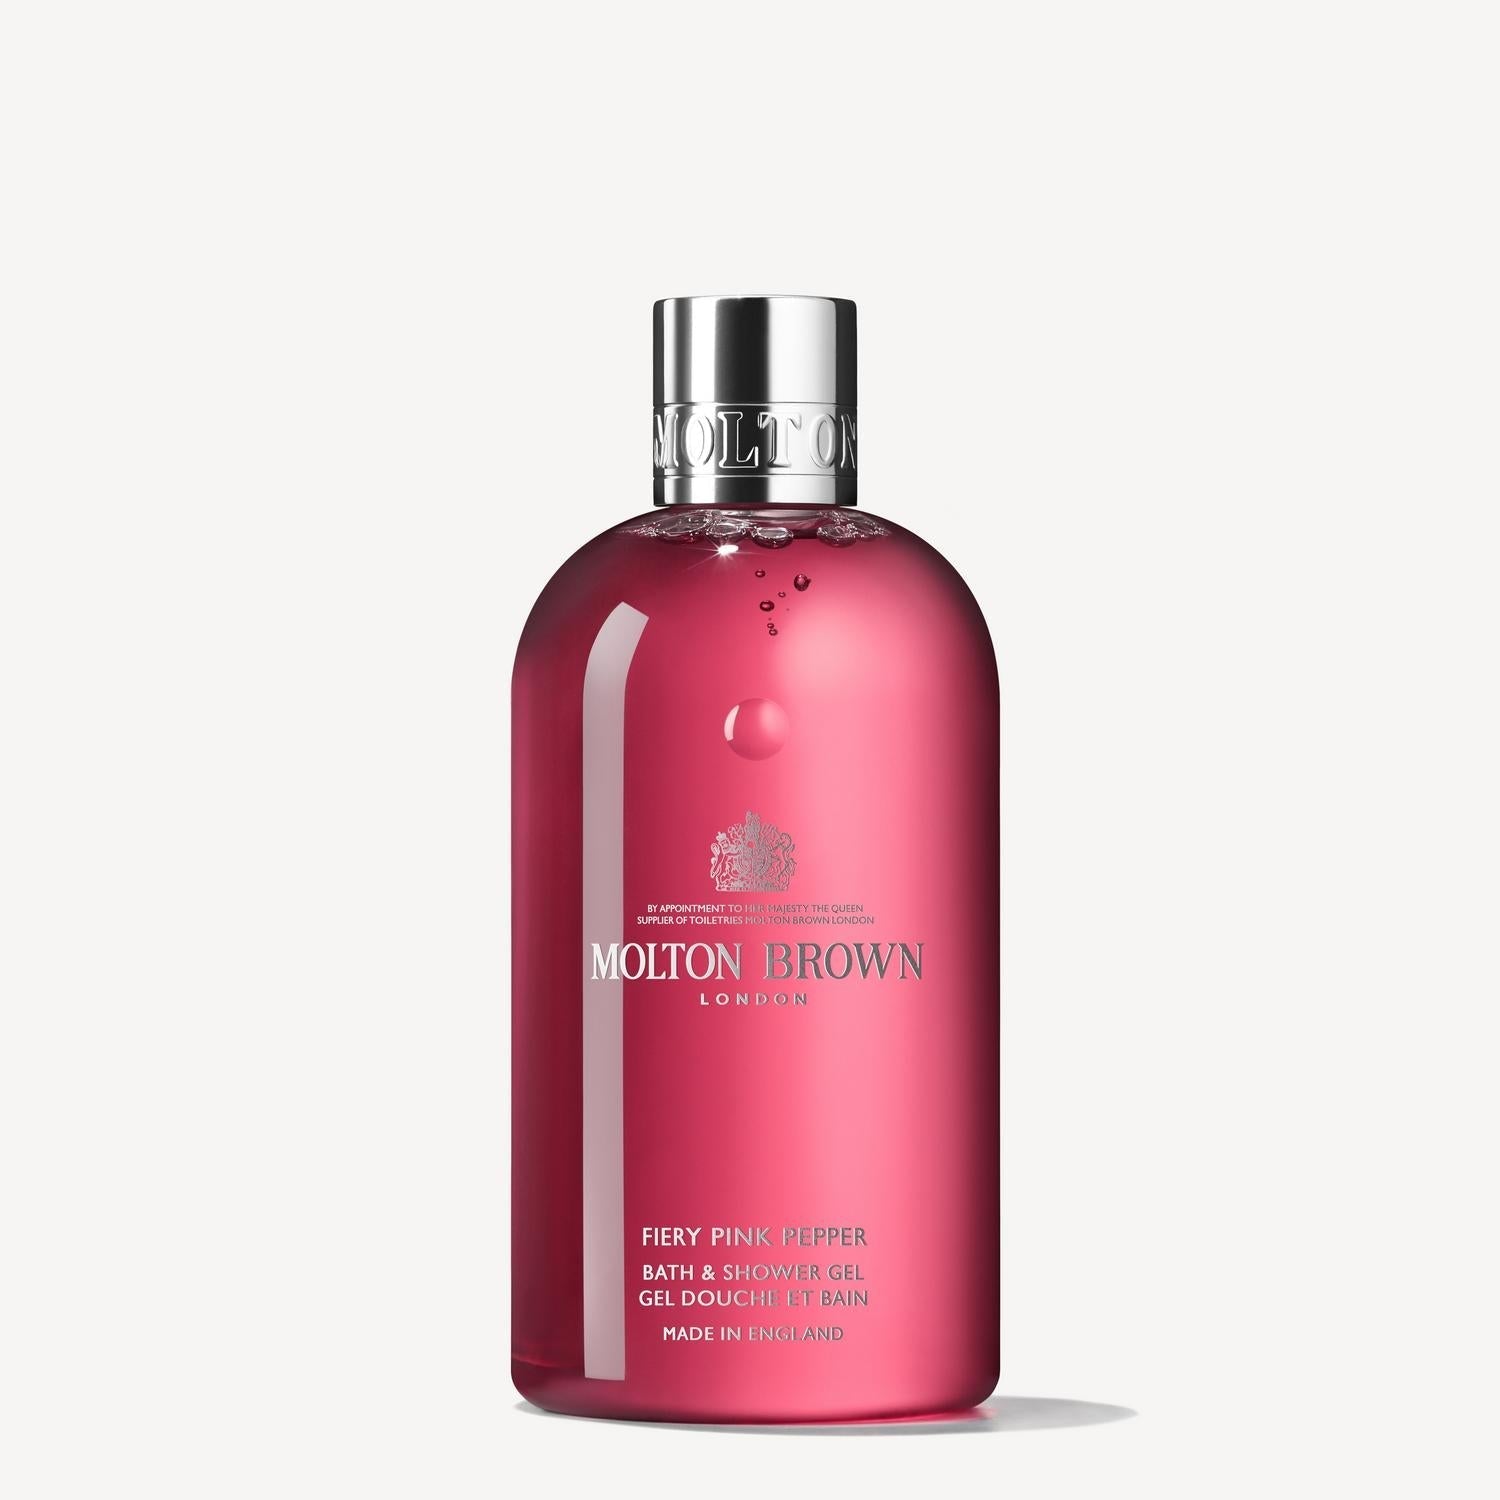 Molton Brown Fiery Pink Pepper Bath and Shower Gel - 300ml